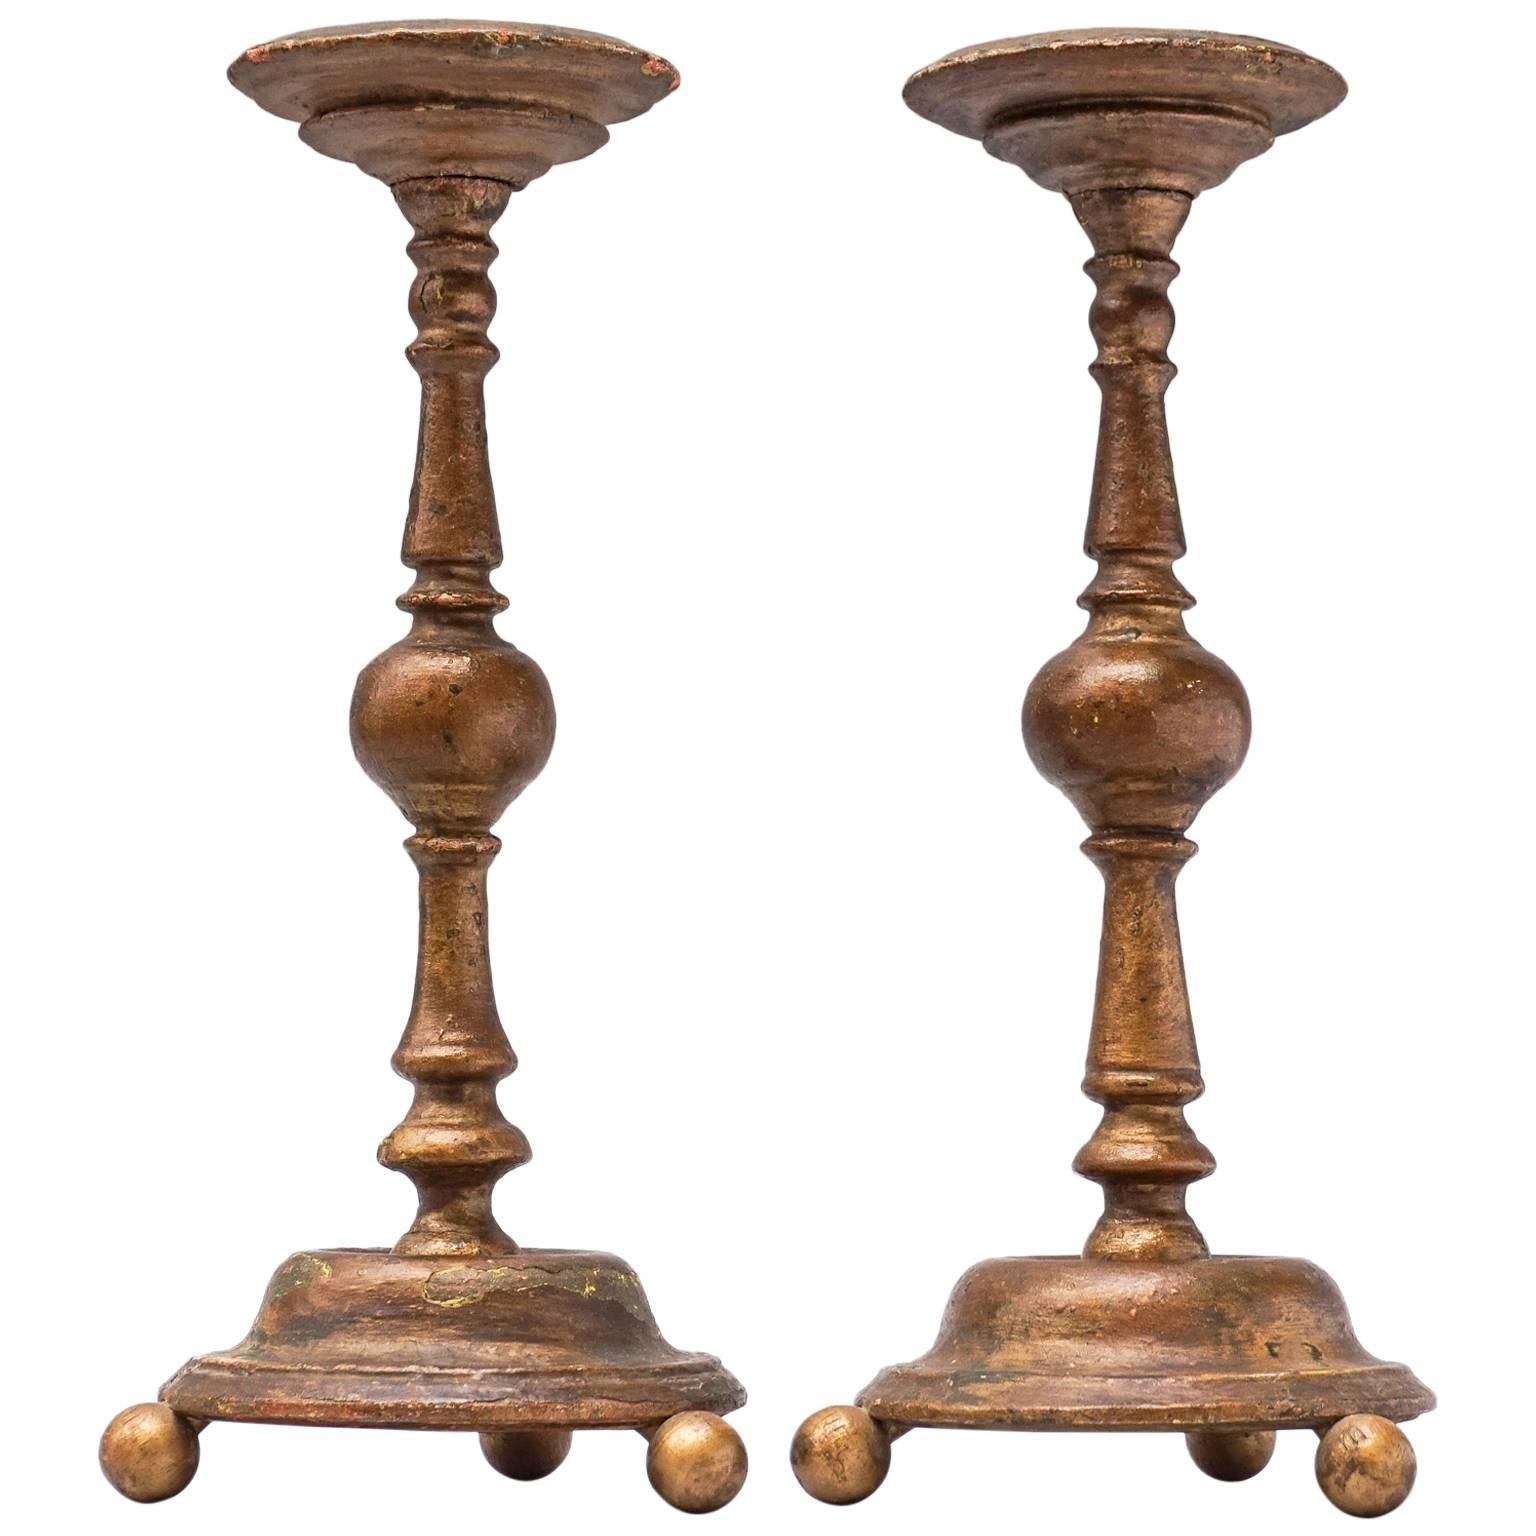 Two Large 18th C. French Polychromed Bois Doré or Gold Painted Wood Candlesticks